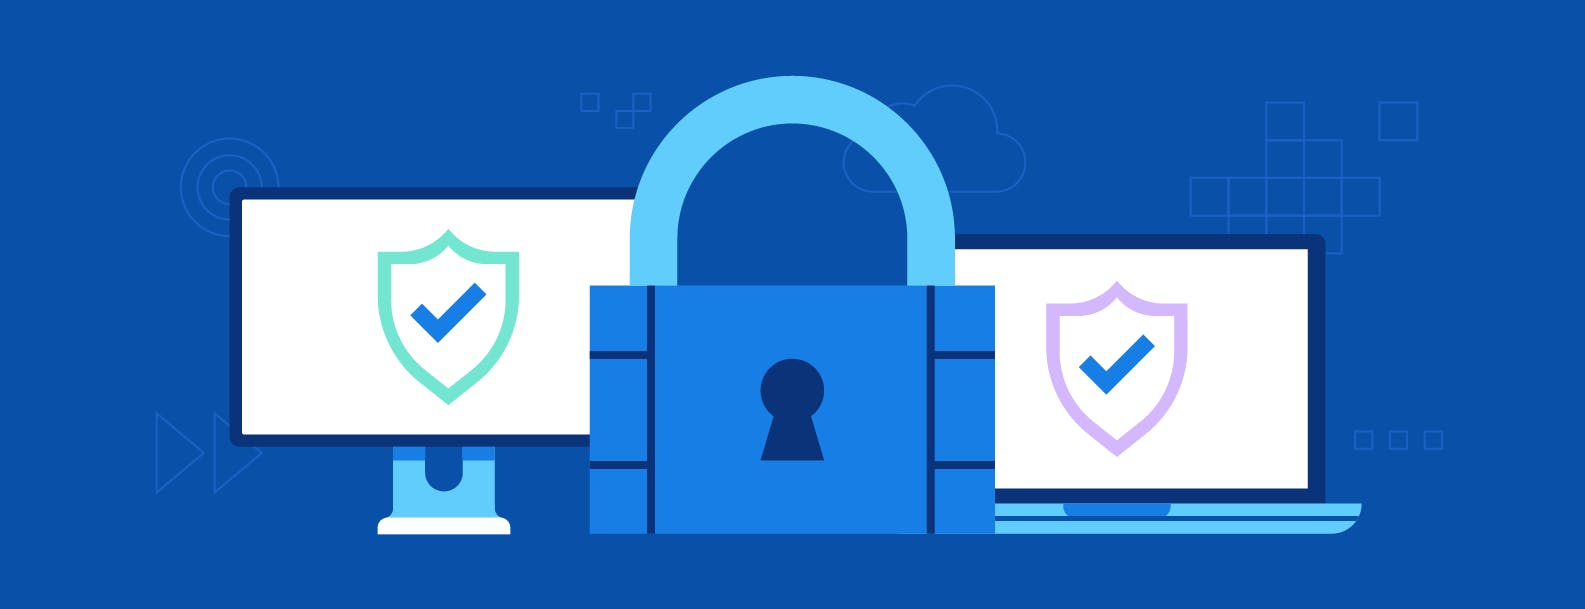 Illustrations of a lock, computer desktop, and laptop in front of a dark blue background depicting a strong security posture. 